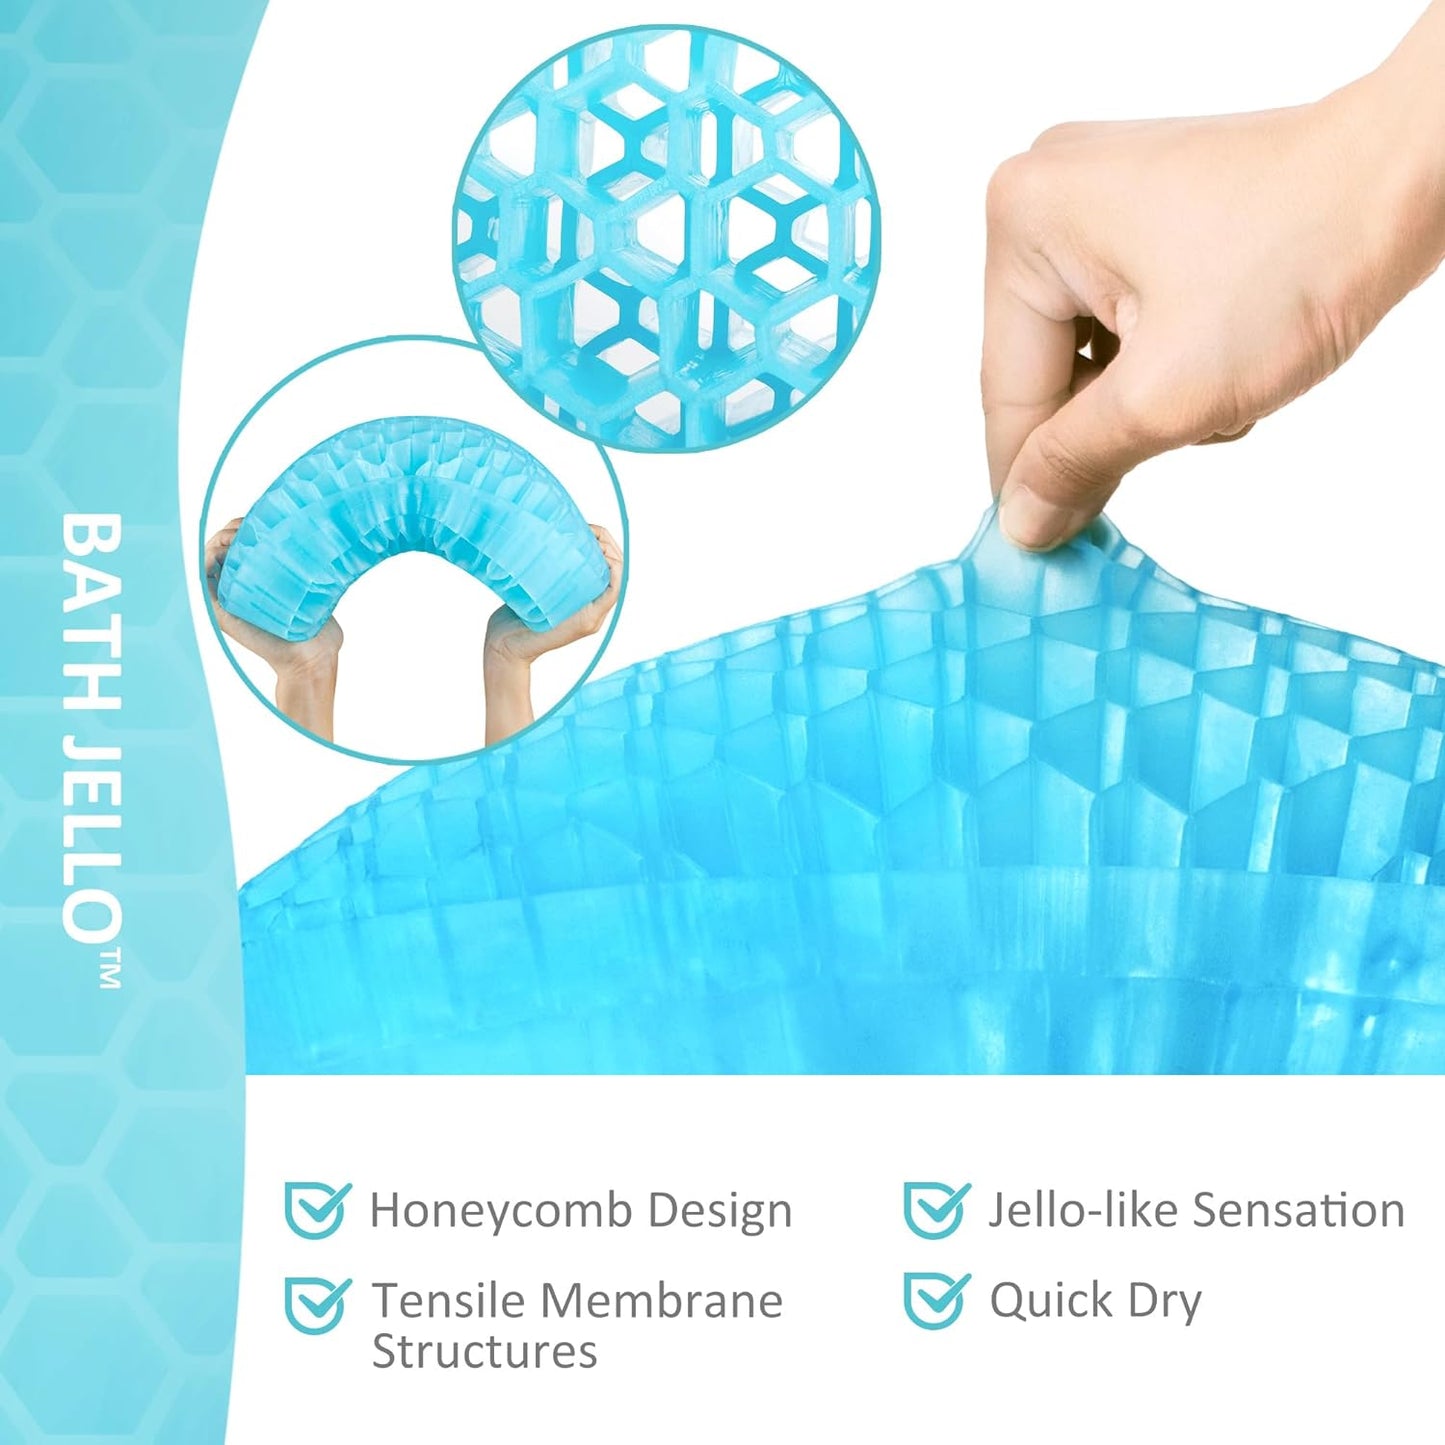 Sunlit Bath Jello Gel Bath Pillows, Lumbar Pillow for Bathtub, Back Support Pillow, Gel Pillow with Non-Slip Suction Cups for Lumbar, Back Rest Support, Fits Curved or Straight Back Tubs, Aqua